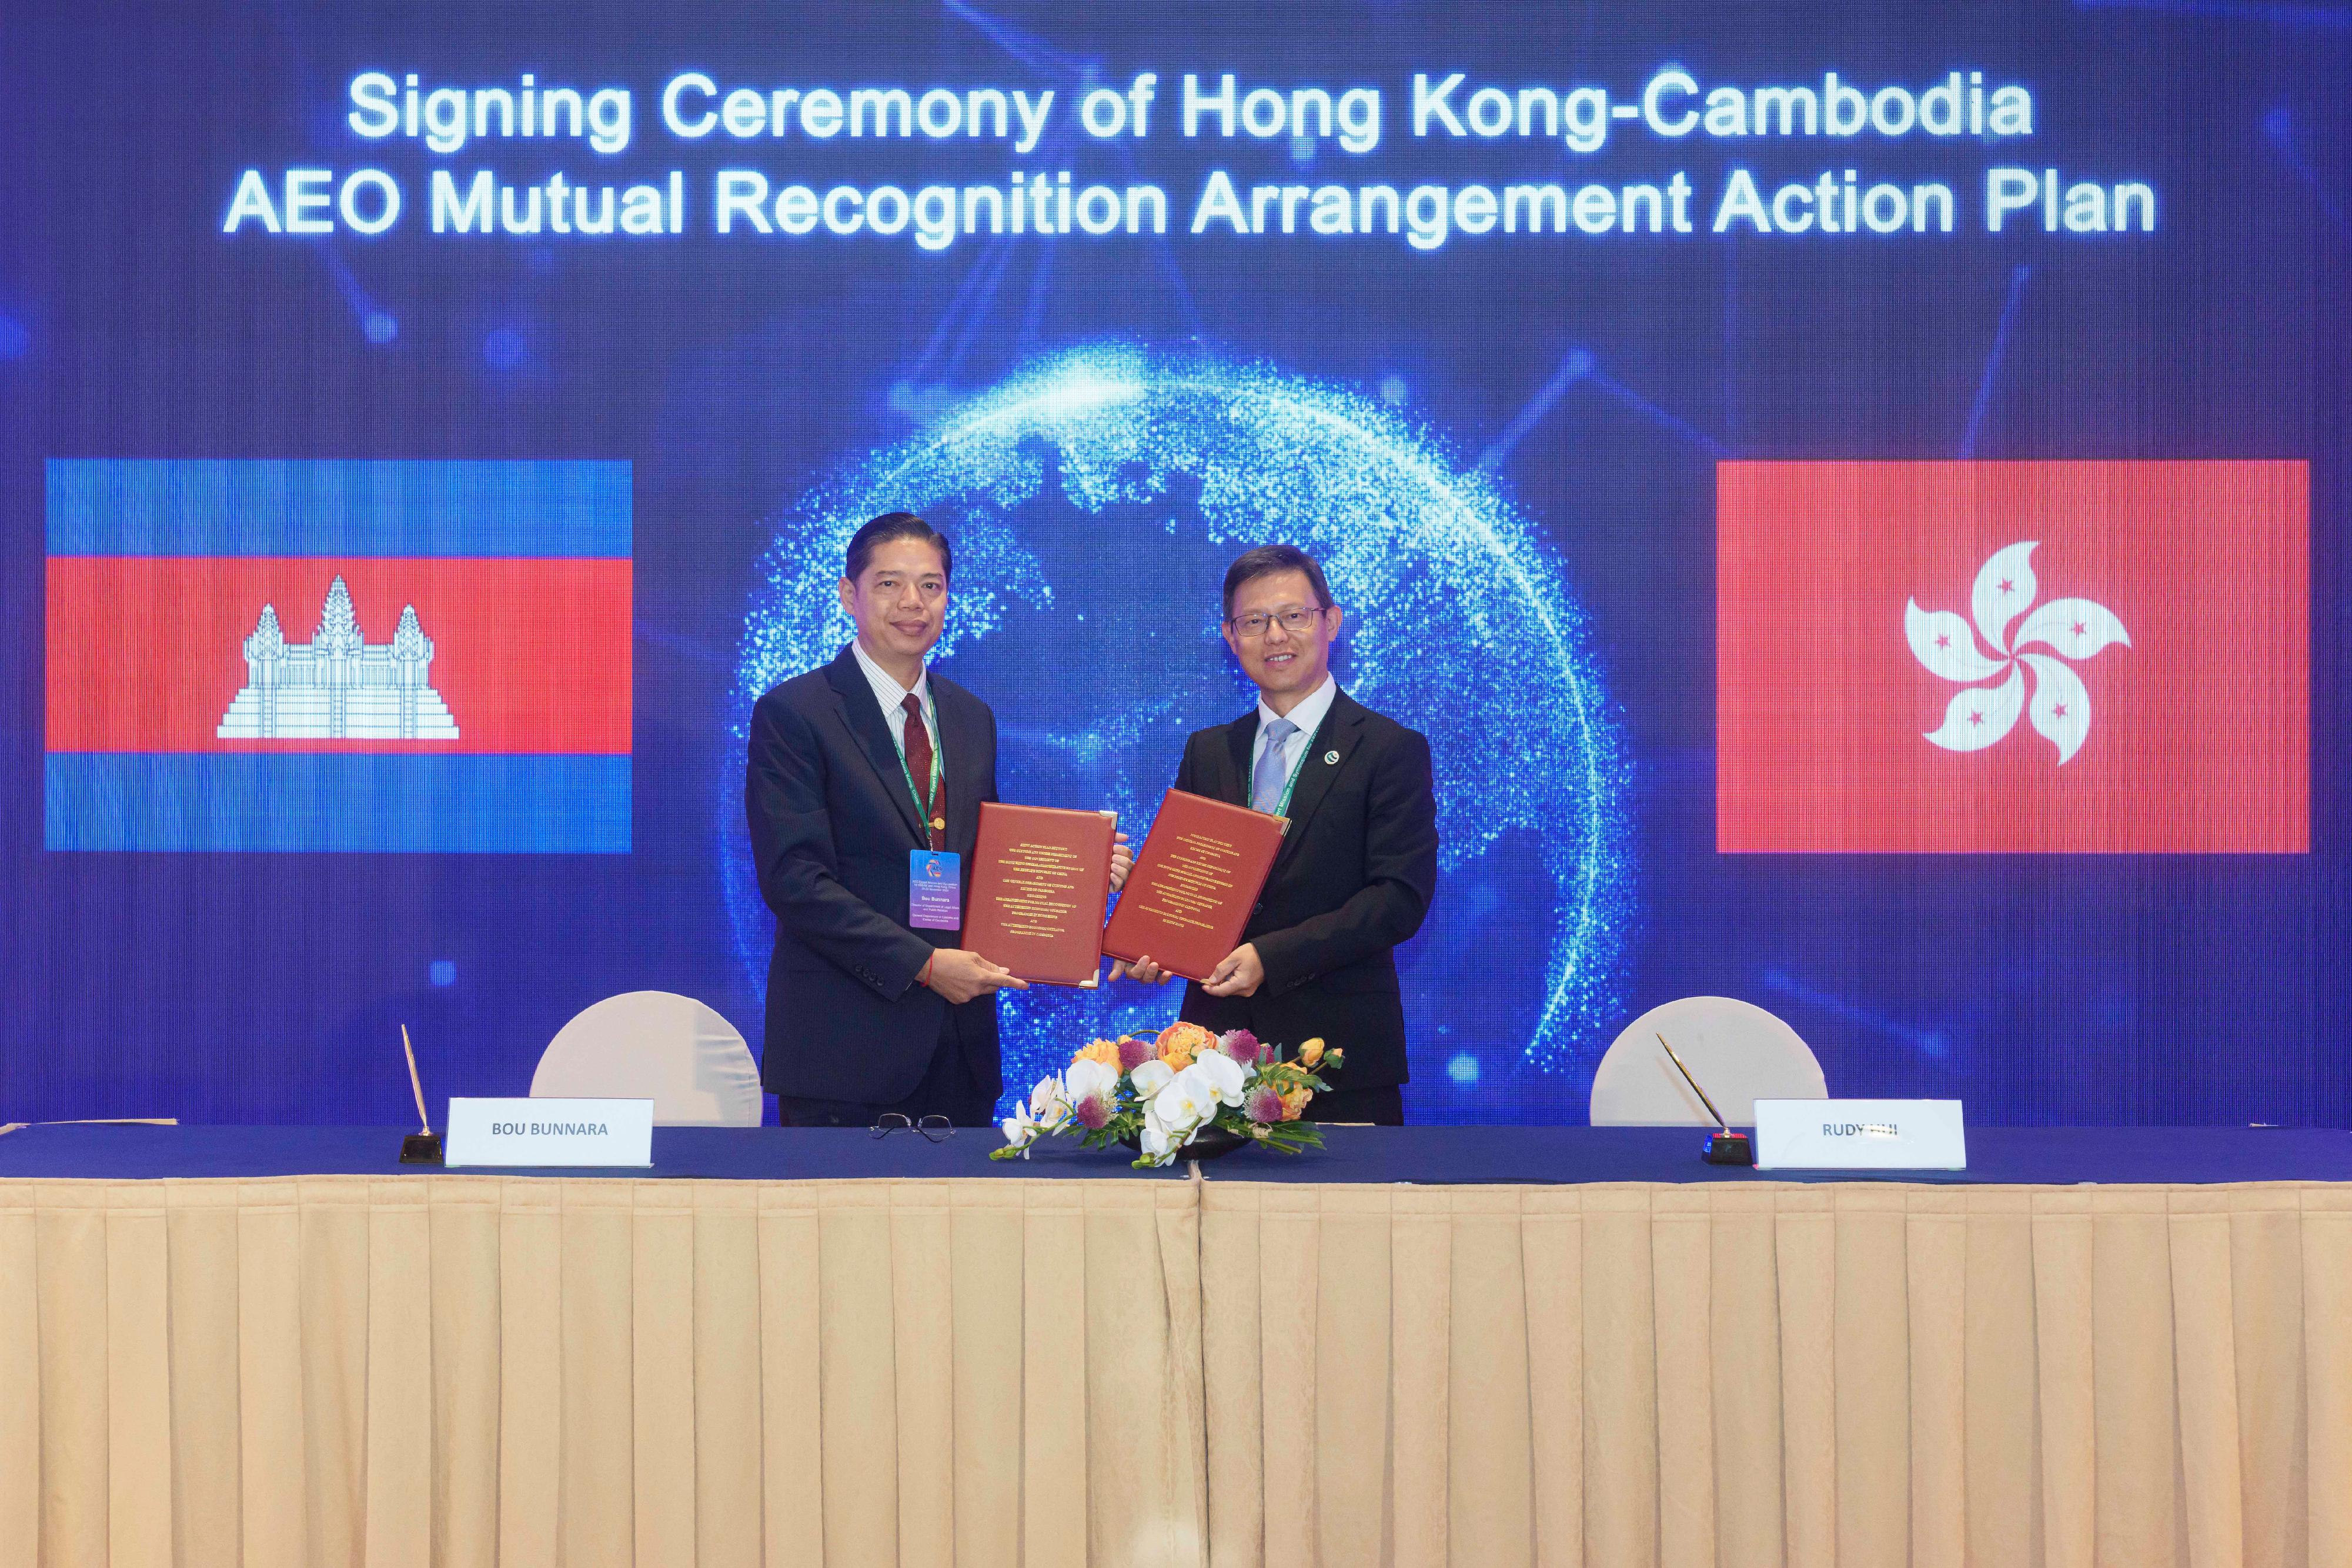 The Assistant Commissioner of Customs and Excise (Excise and Strategic Support), Mr Rudy Hui (right), exchanges the signed the Action Plan for AEO Mutual Recognition Arrangement with a representative from Customs administration of Cambodia at the AEO Symposium for ASEAN and Hong Kong, China held today (November 30).

